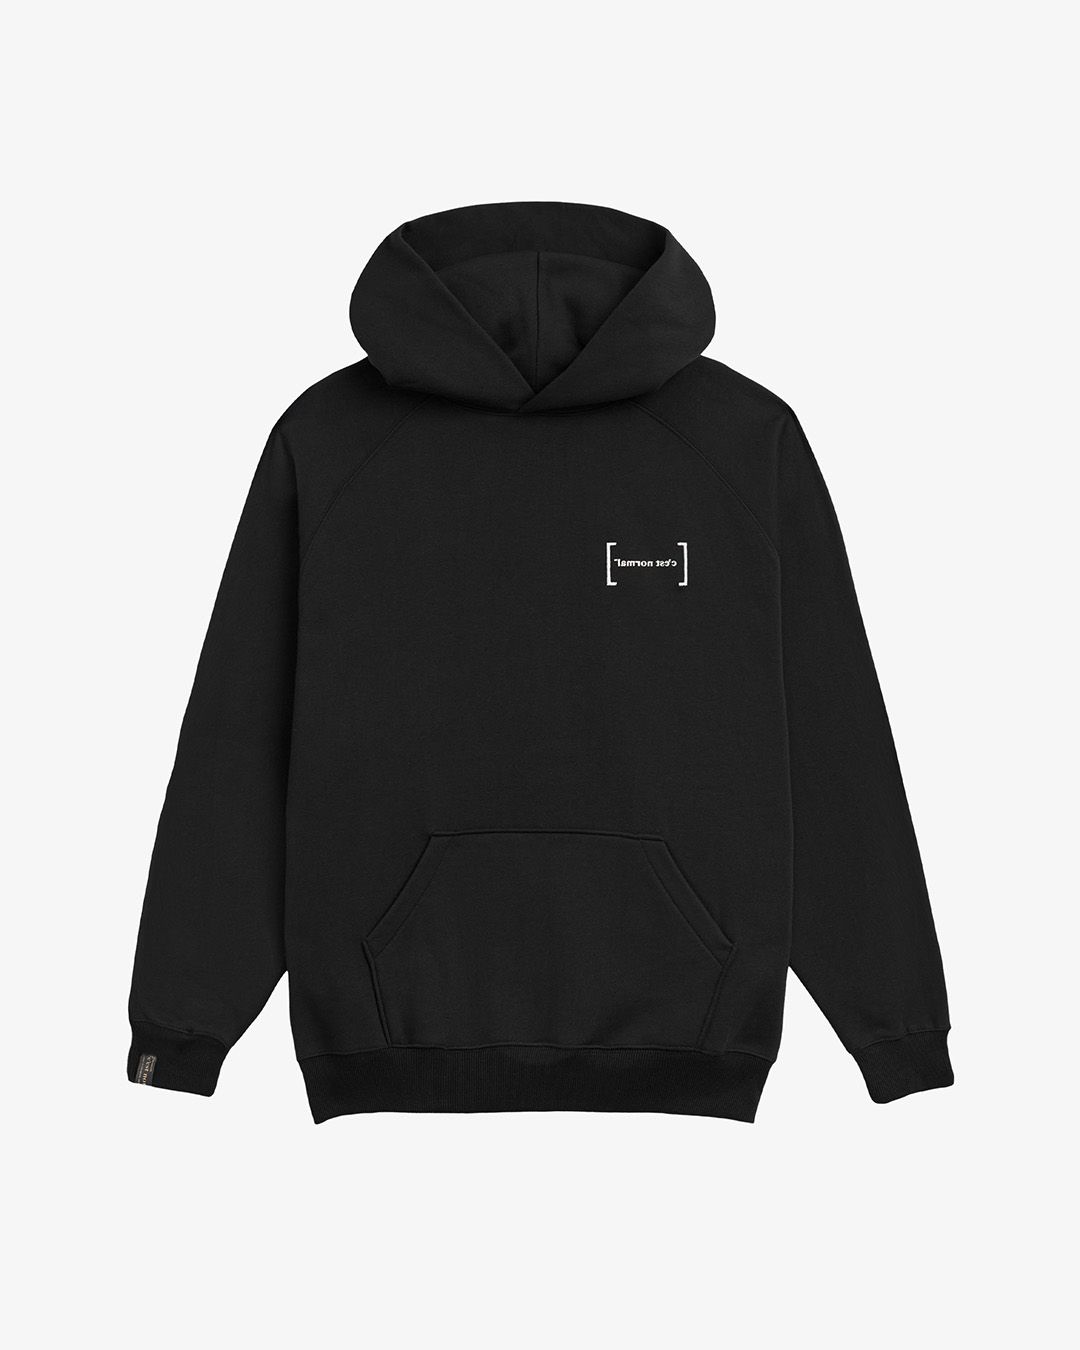 Le Boxy Hoodie | c'est normal - Around here.